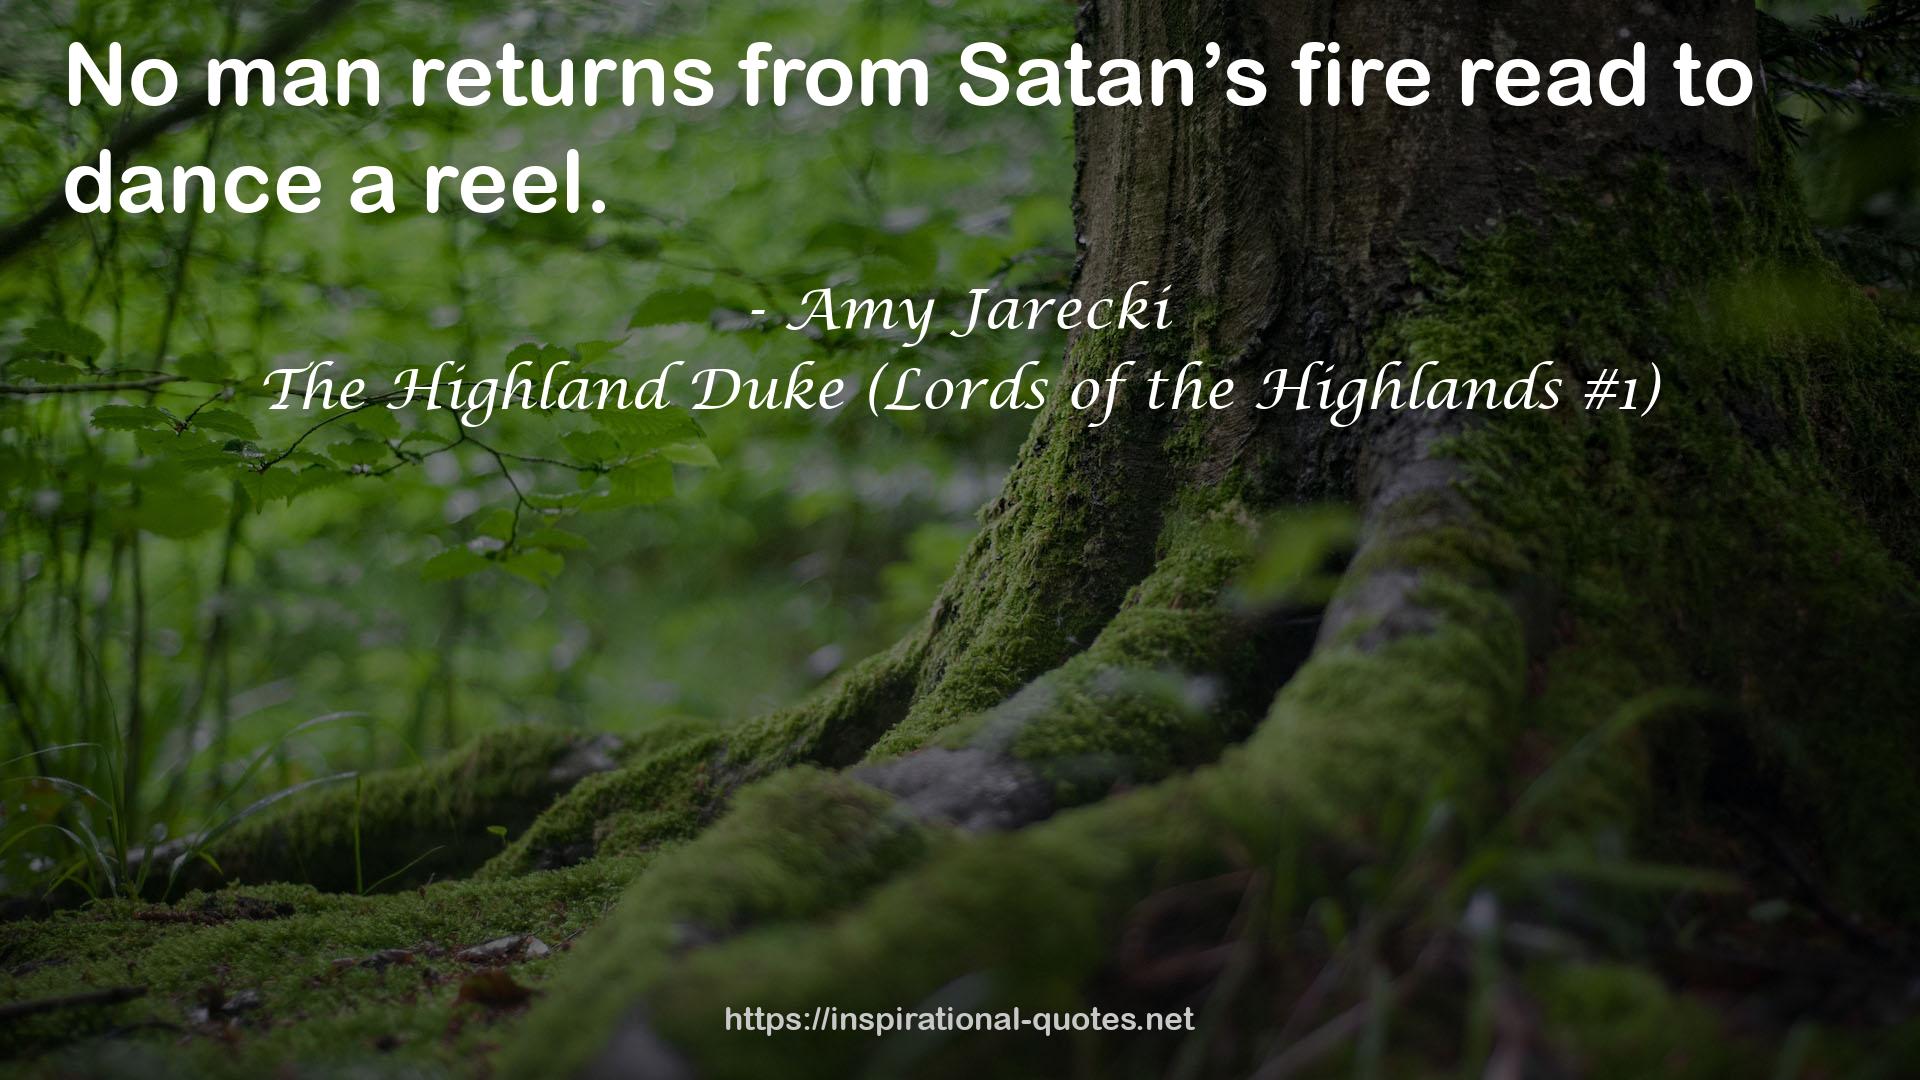 The Highland Duke (Lords of the Highlands #1) QUOTES